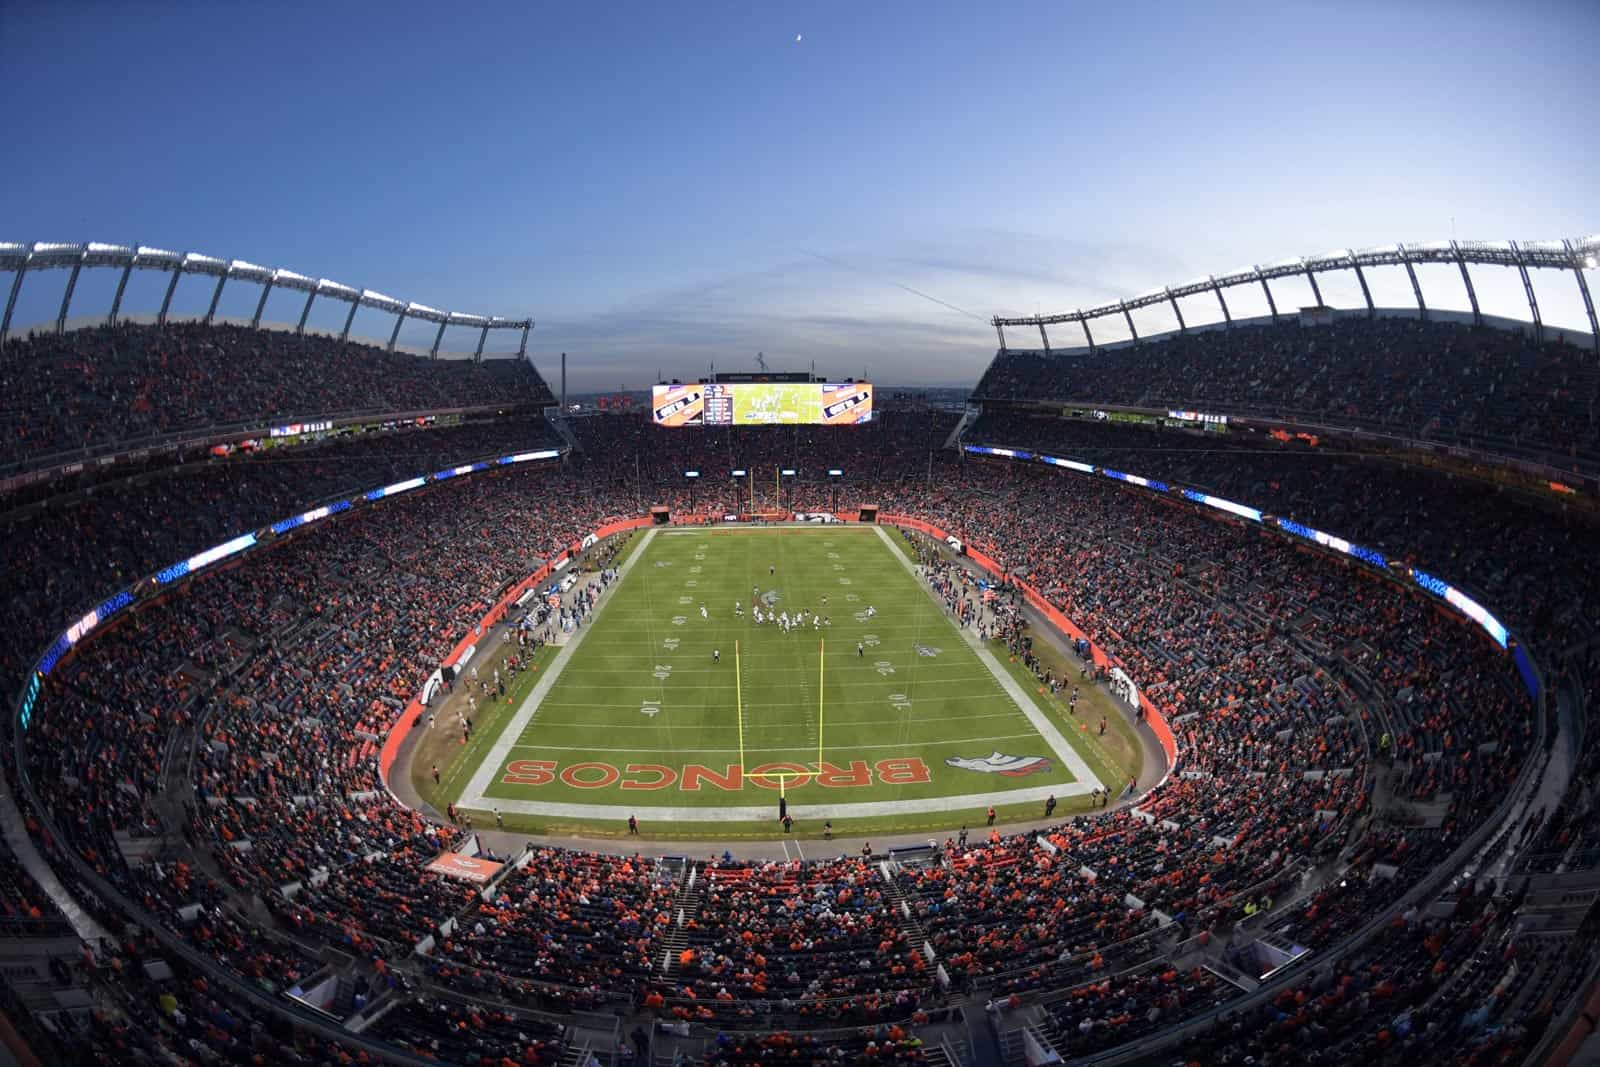 Empower Field At Mile High